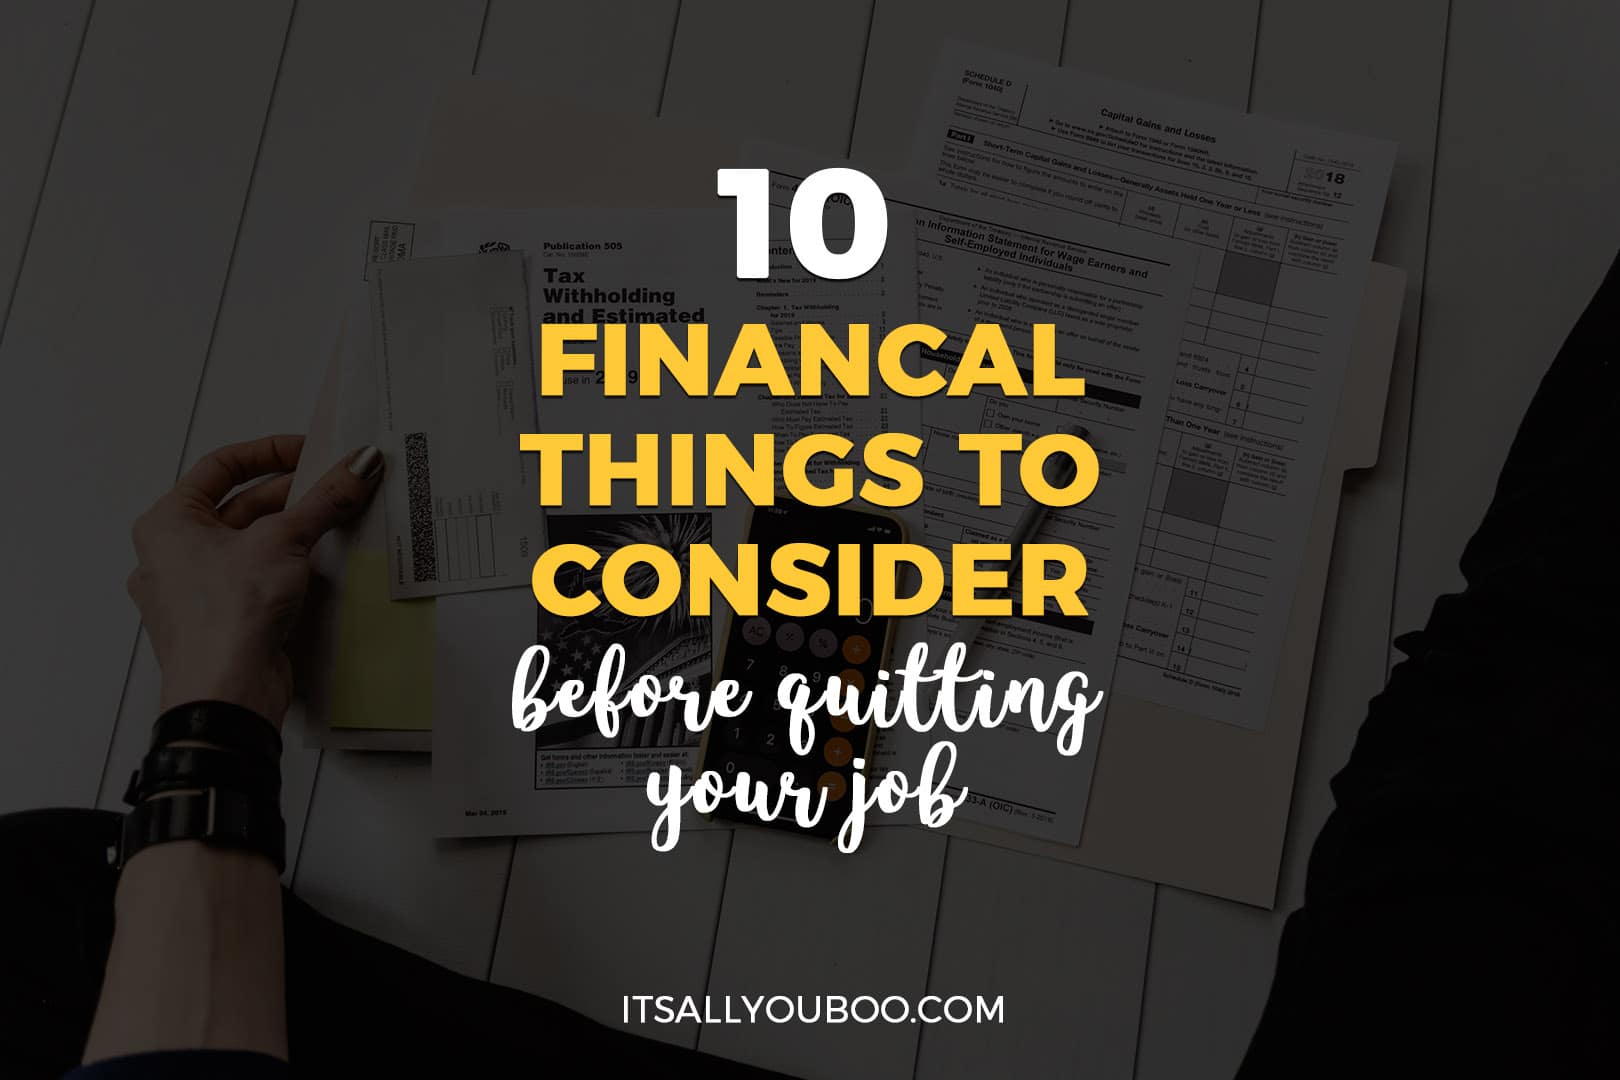 10 Financial Things to Consider Before Quitting Your Job